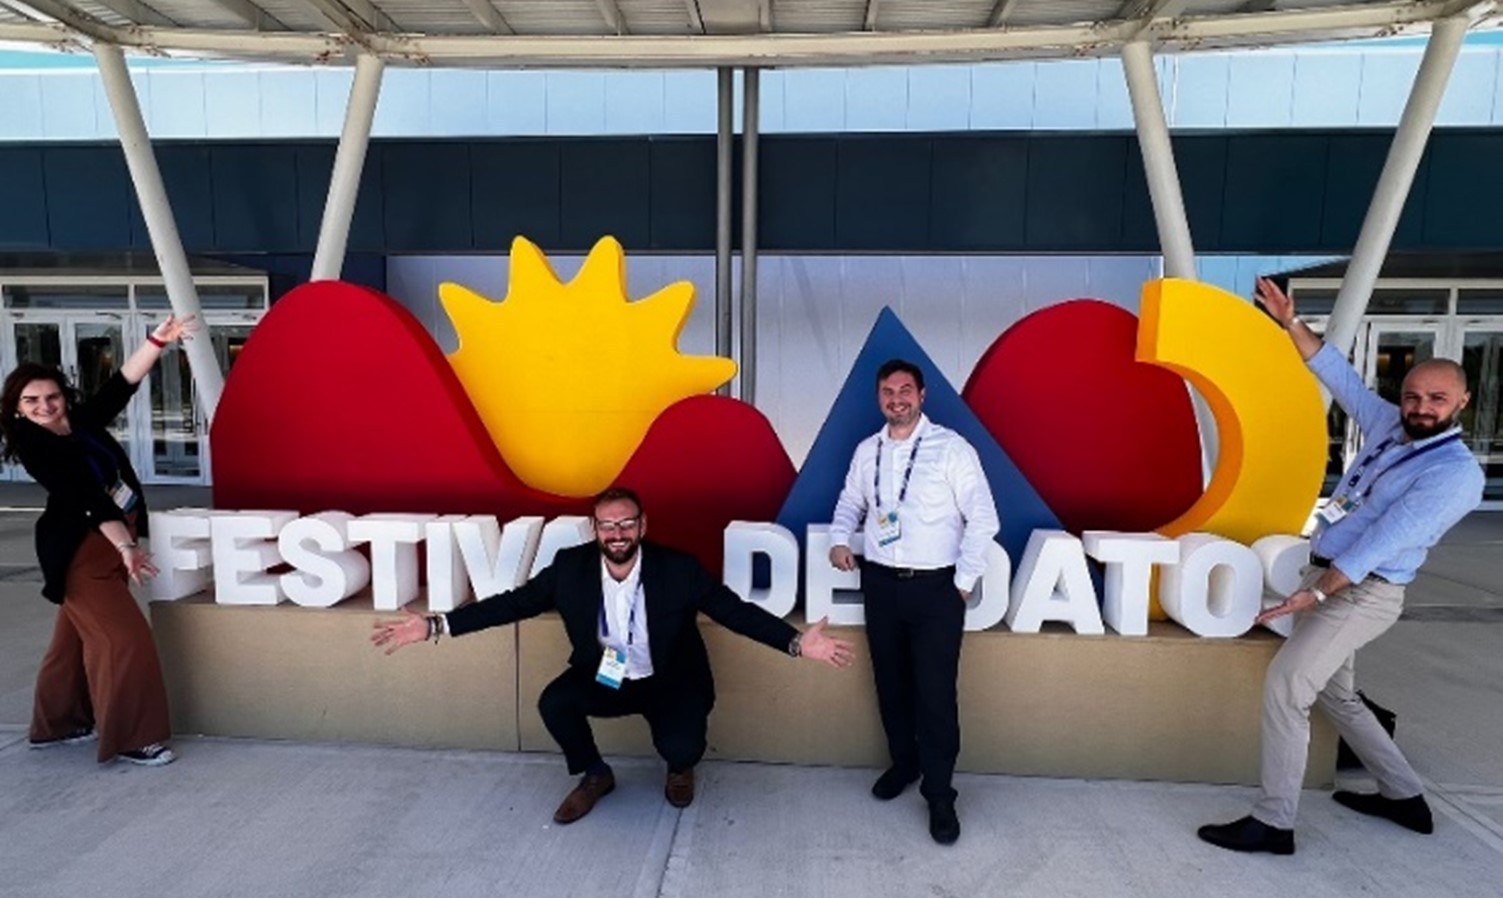 Three people smiling in front of a Festival De Datos sign